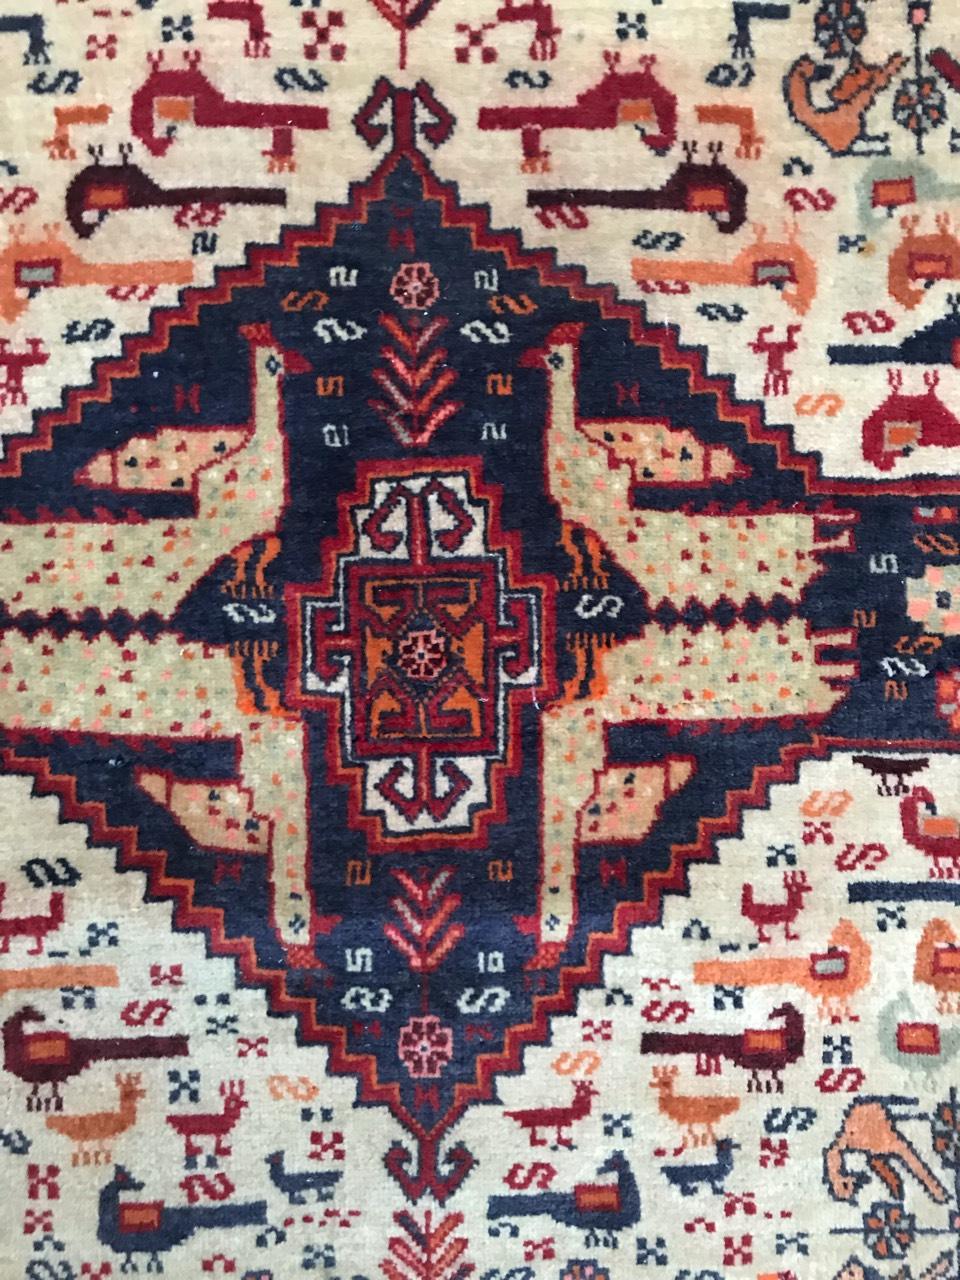 Nice vintage Ghashghai rug with tribal design with animals, beautiful colors with blue, red and orange. Finely hand knotted with wool velvet on wool foundation.

✨✨✨
